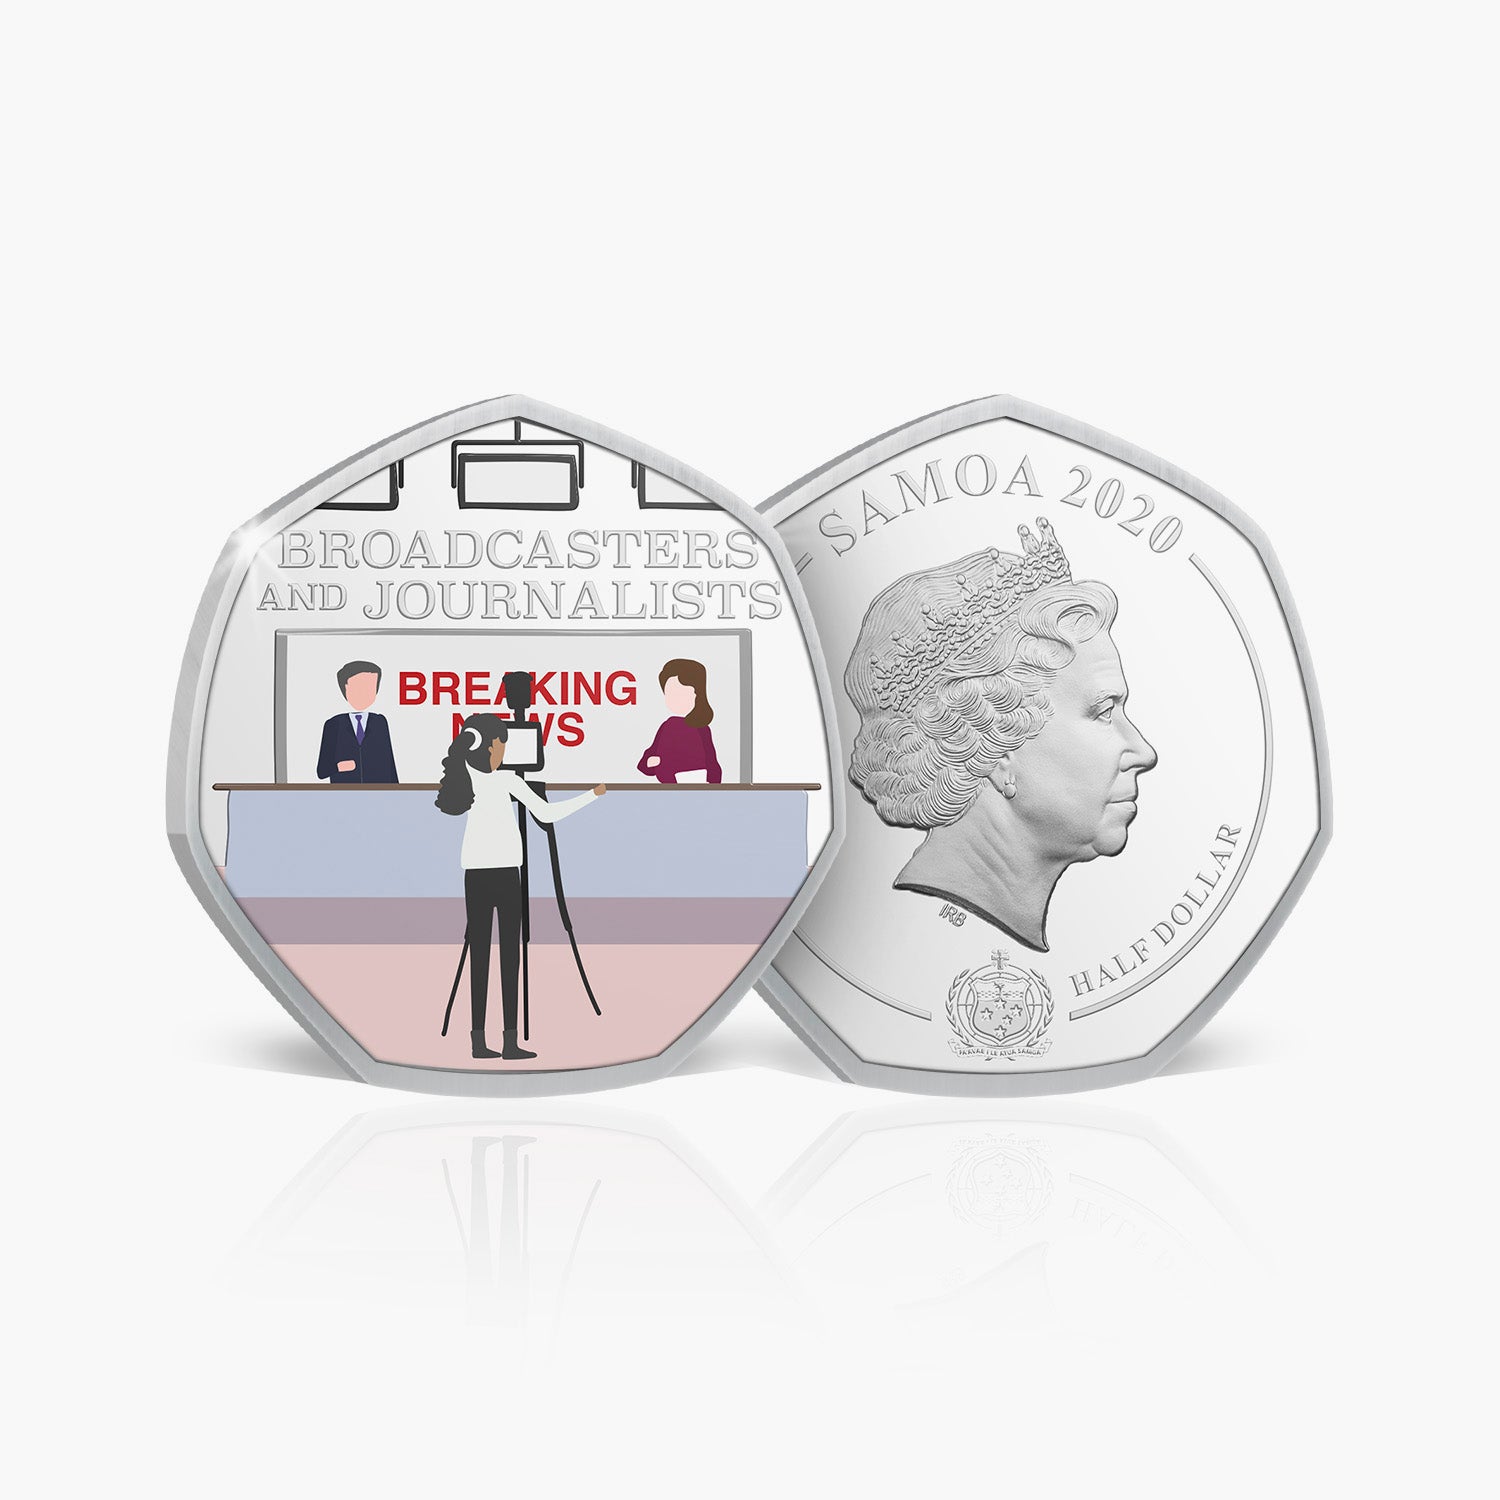 Broadcasters and Journalists Silver Plated Coin